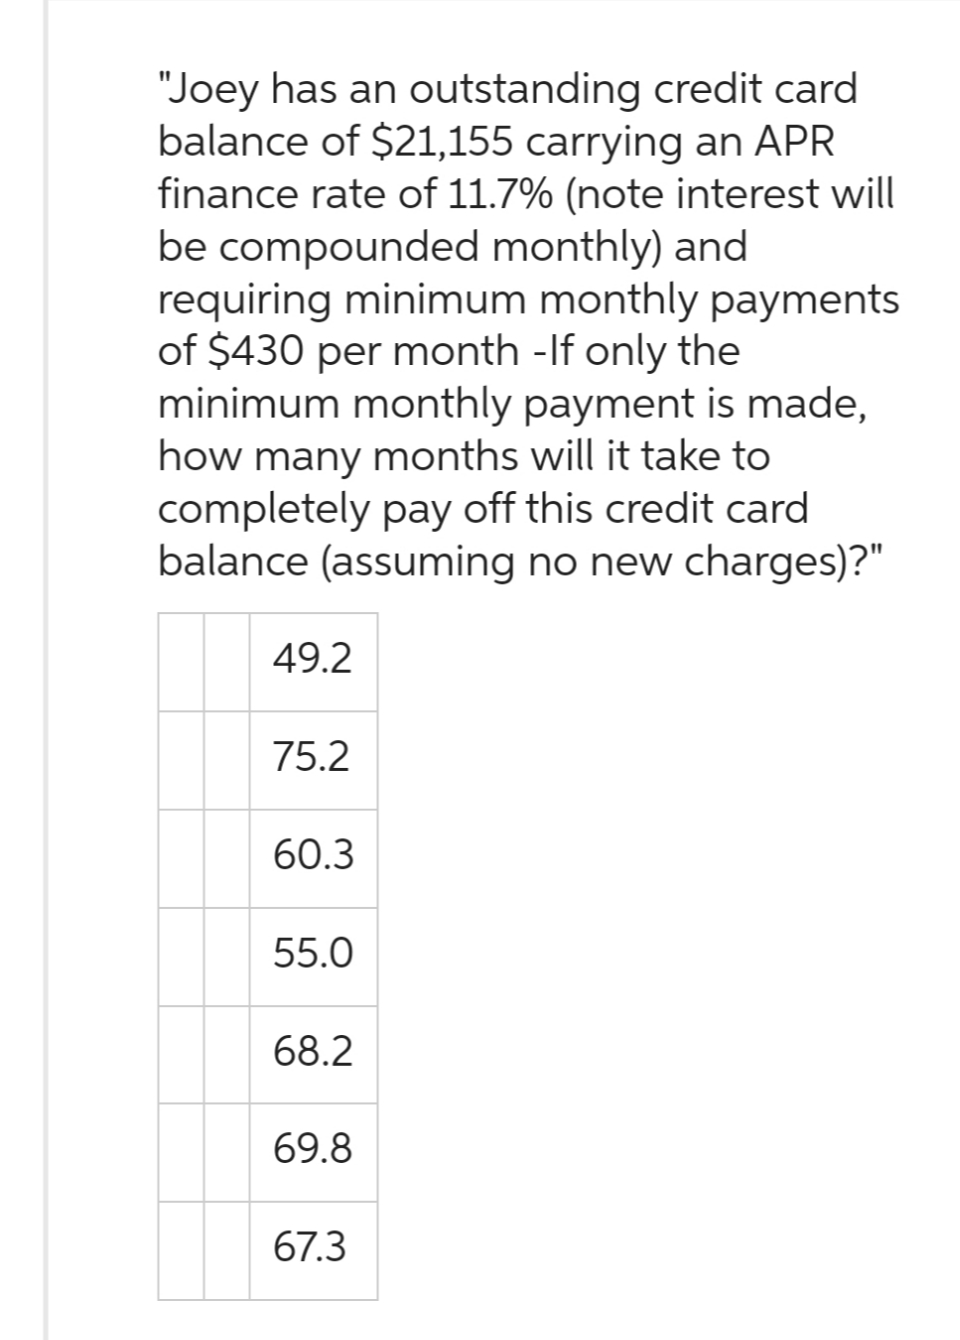 "Joey has an outstanding credit card
balance of $21,155 carrying an APR
finance rate of 11.7% (note interest will
be compounded monthly) and
requiring minimum monthly payments
of $430 per month - If only the
minimum monthly payment is made,
how many months will it take to
completely pay off this credit card
balance (assuming no new charges)?"
49.2
75.2
60.3
55.0
68.2
69.8
67.3